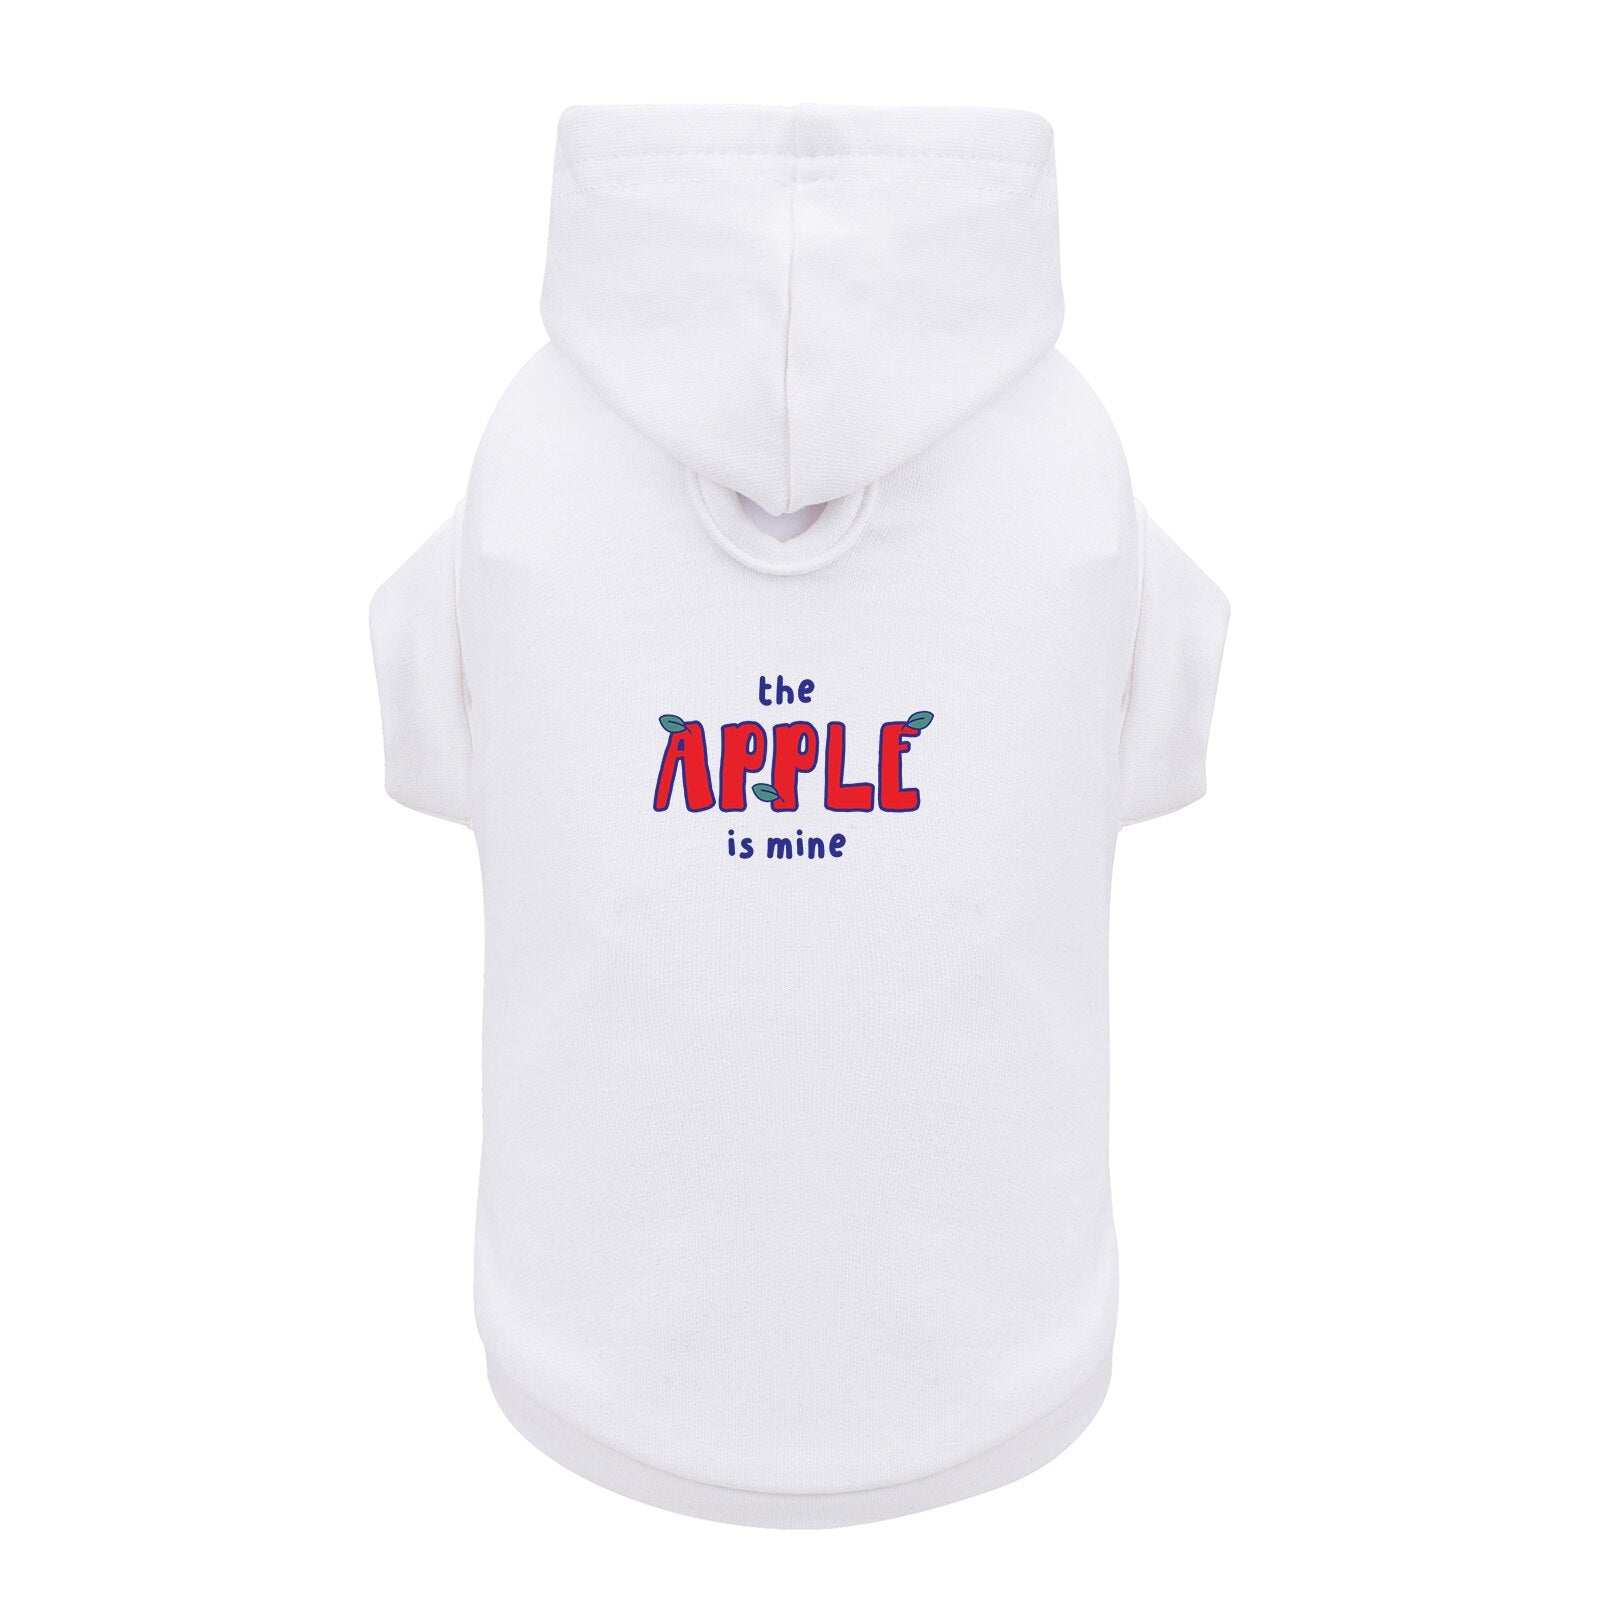 Funny Cute Classics Letter Words ‘The Apple is Mine’  Printed Pet Hoodies, for Small Medium Large Big Dogs Cats